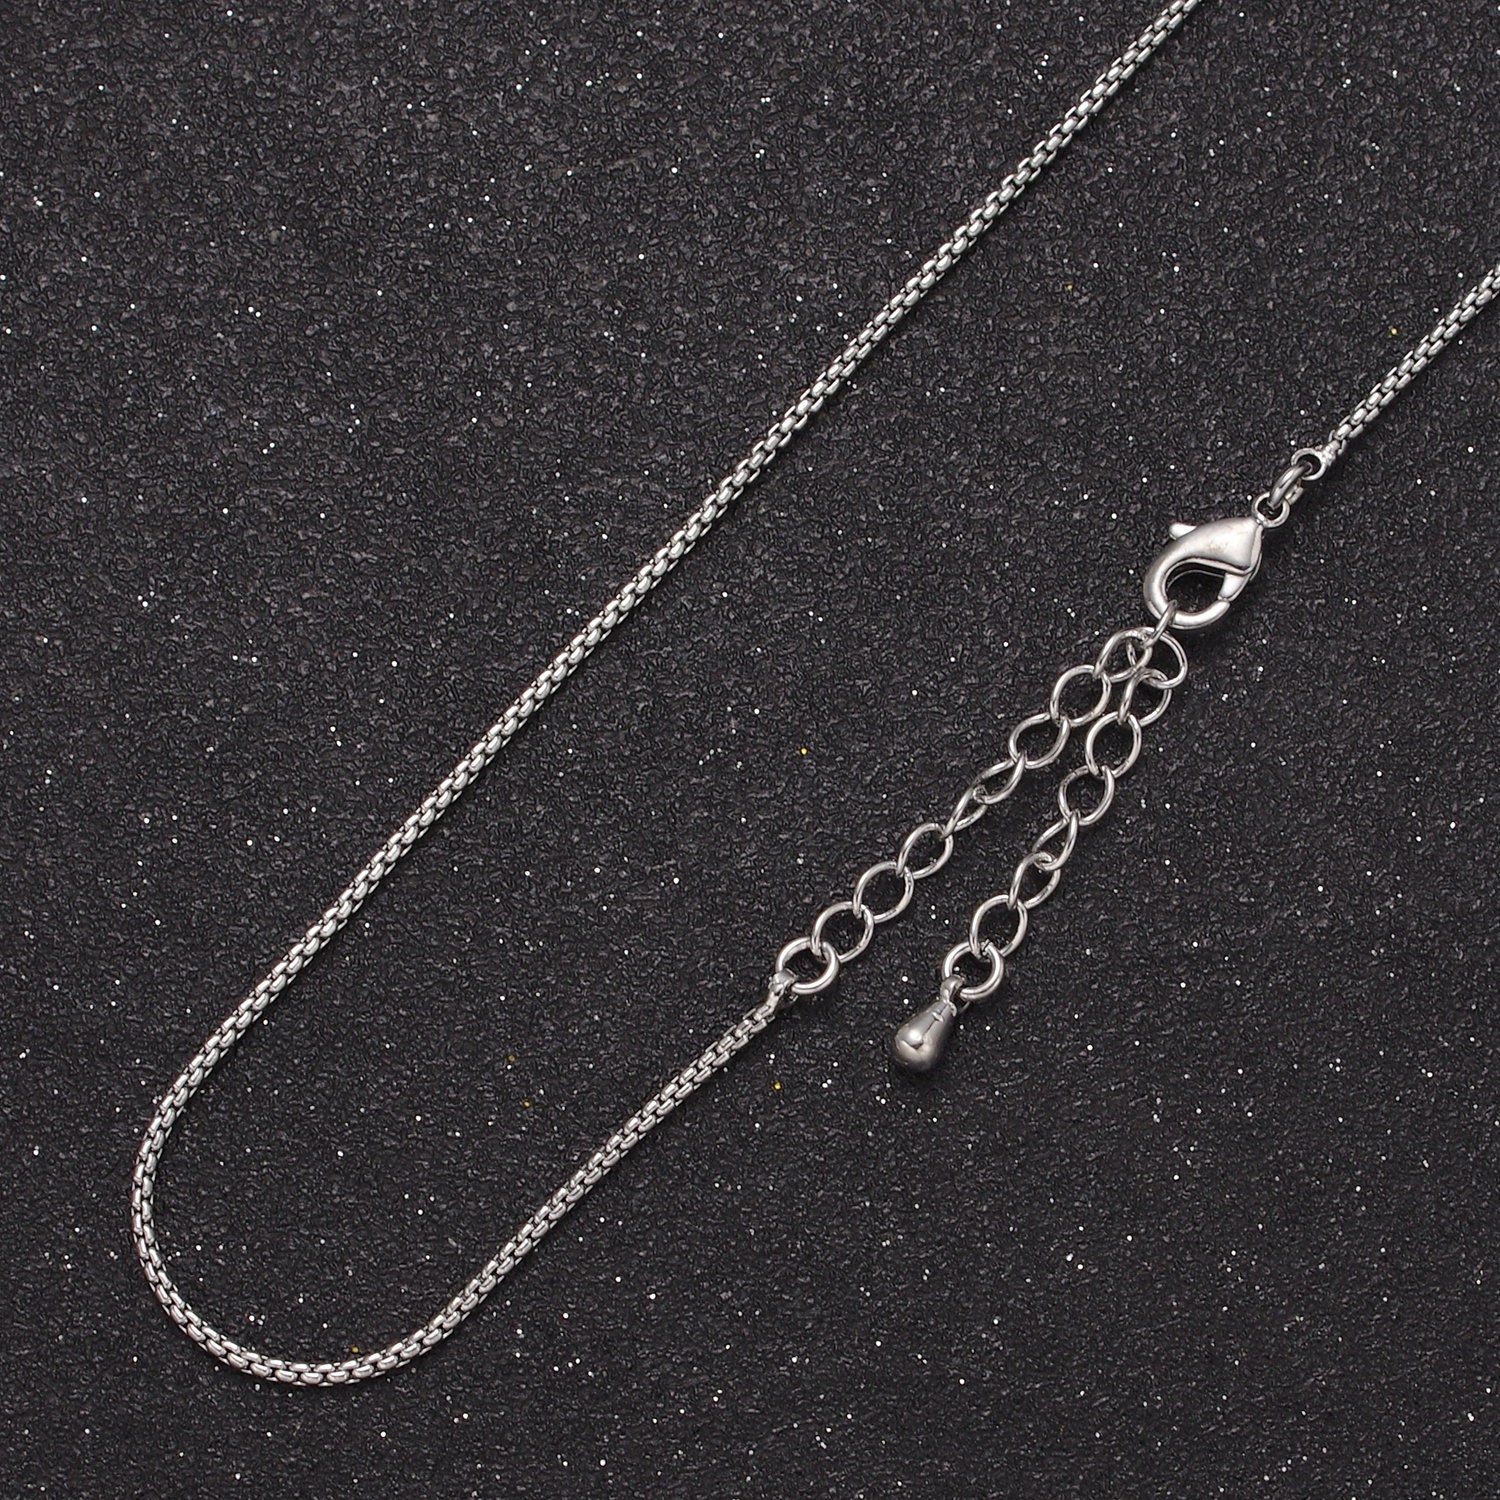 Dainty 24k Gold Filled Rolo Chain Necklace 1.3 Mm ROLO Link - Etsy